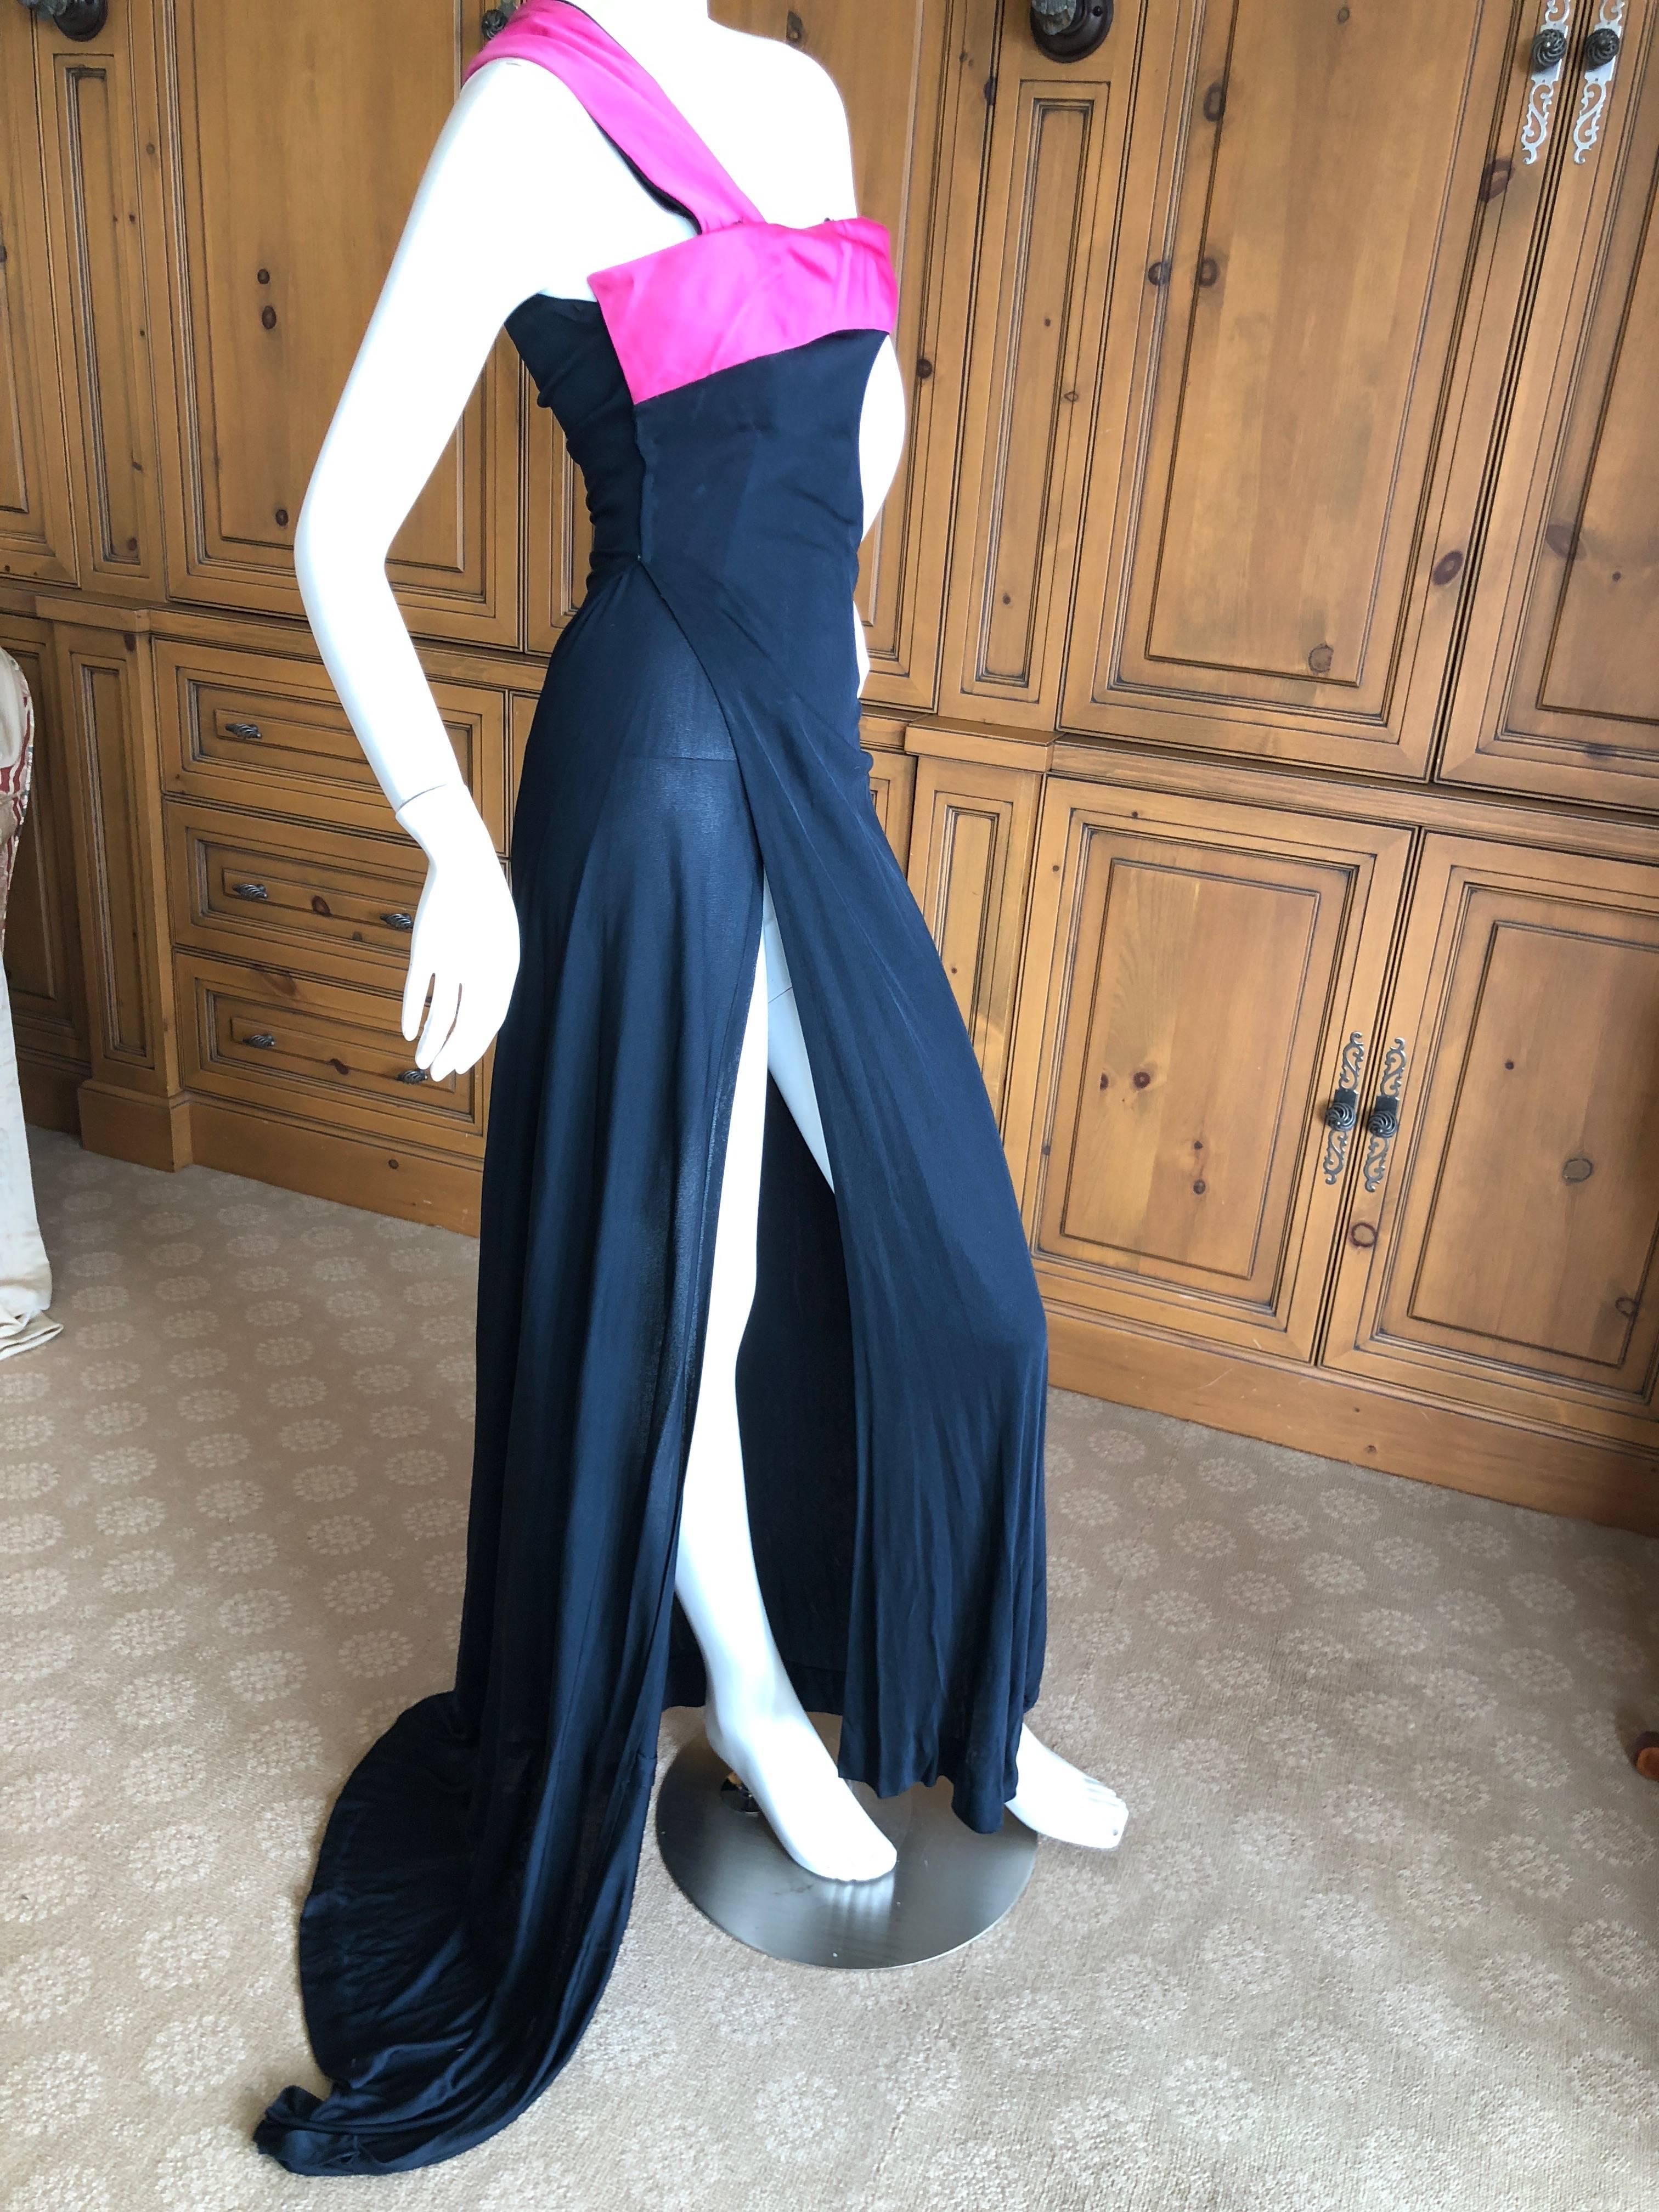 Cardinali 1975 Silk One Shoulder Evening Dress w High Slit and Matching Jacket In Good Condition For Sale In Cloverdale, CA